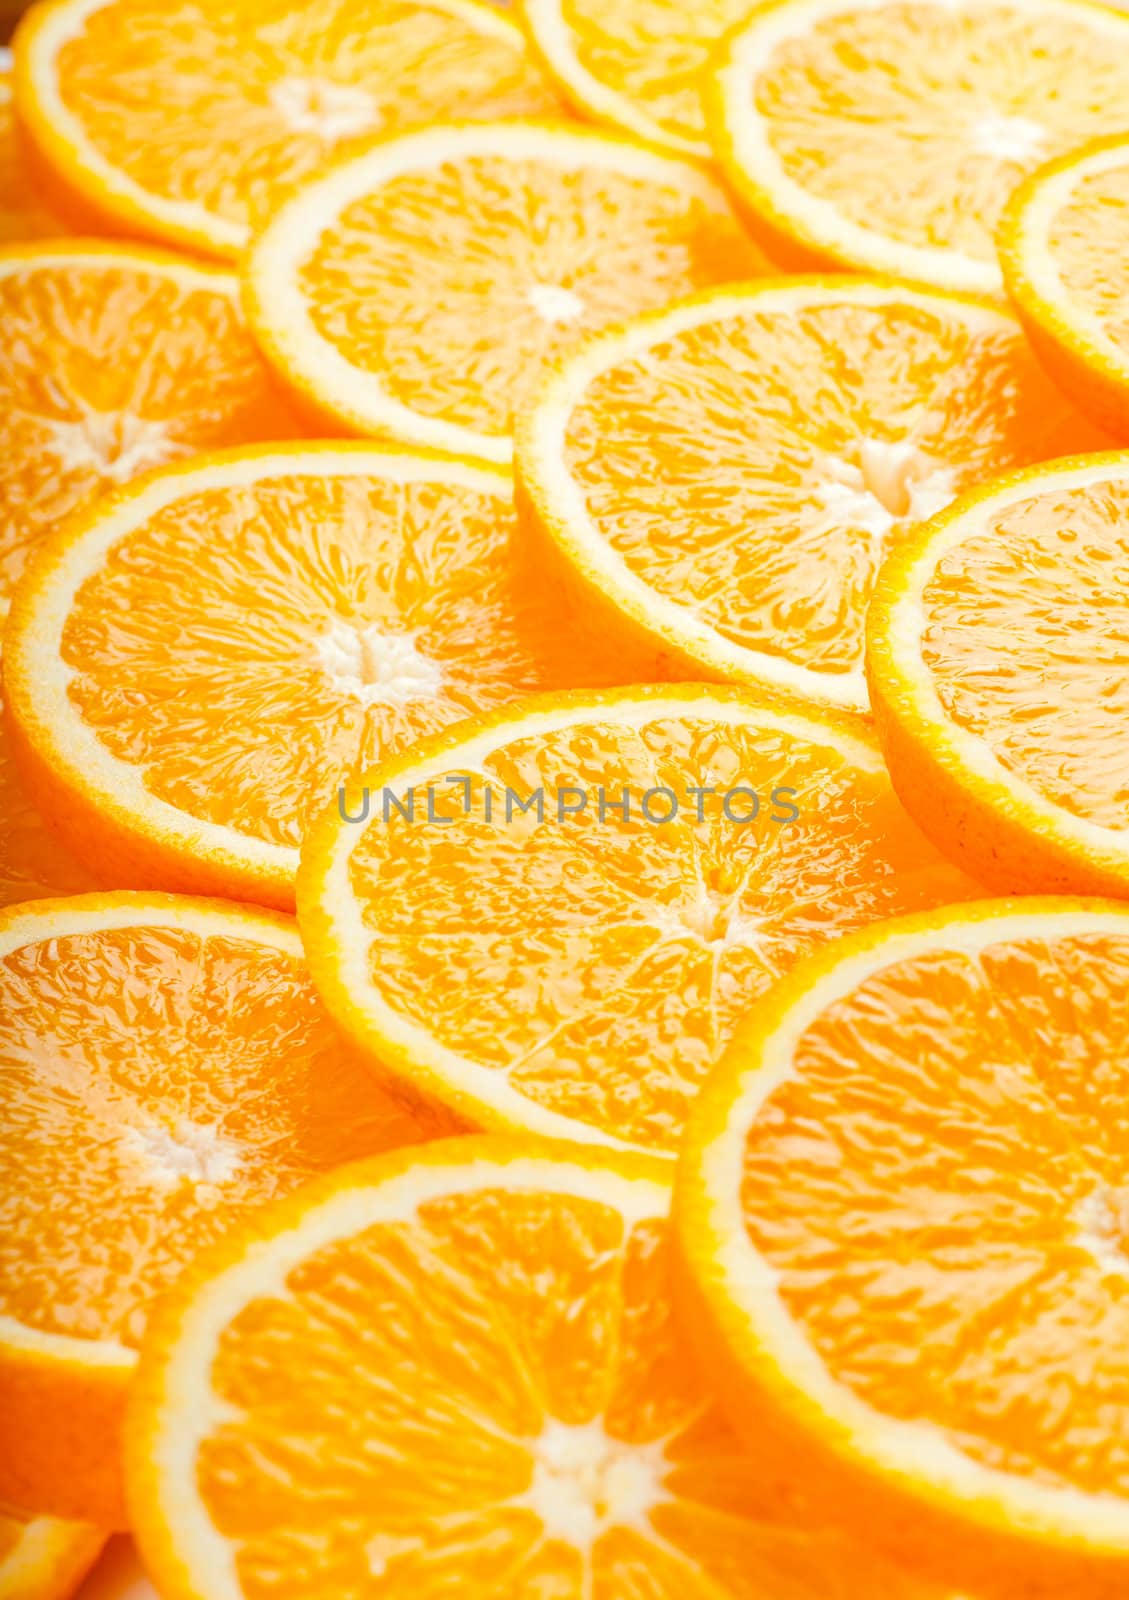 Abstract background with fresh juicy orange slices